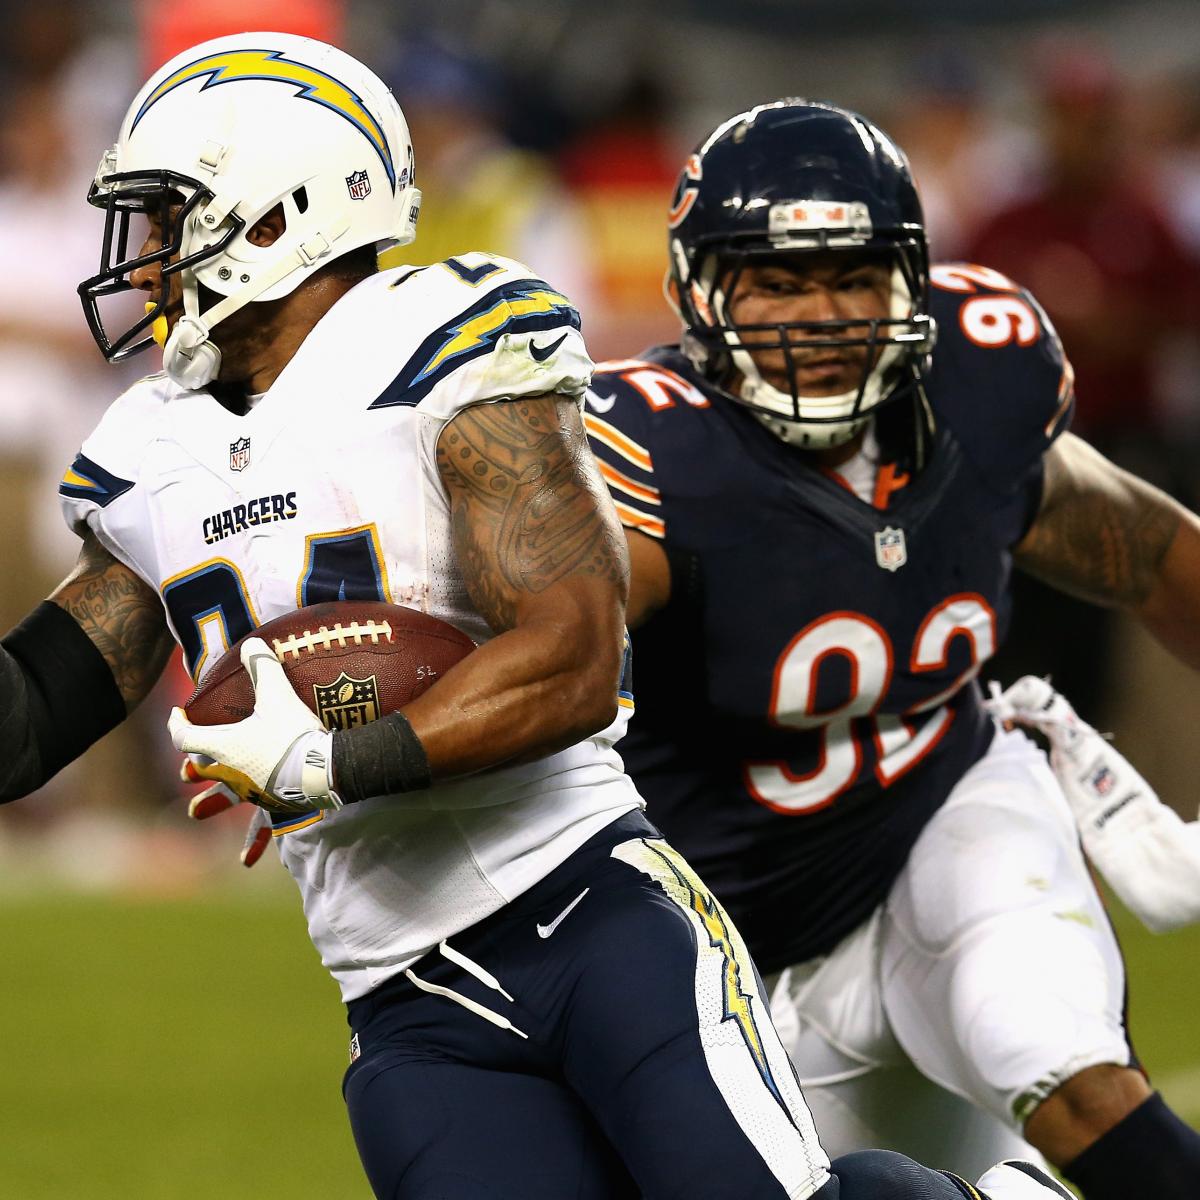 Chicago Bears Free Agents What Will It Take to Keep Key Bears? News